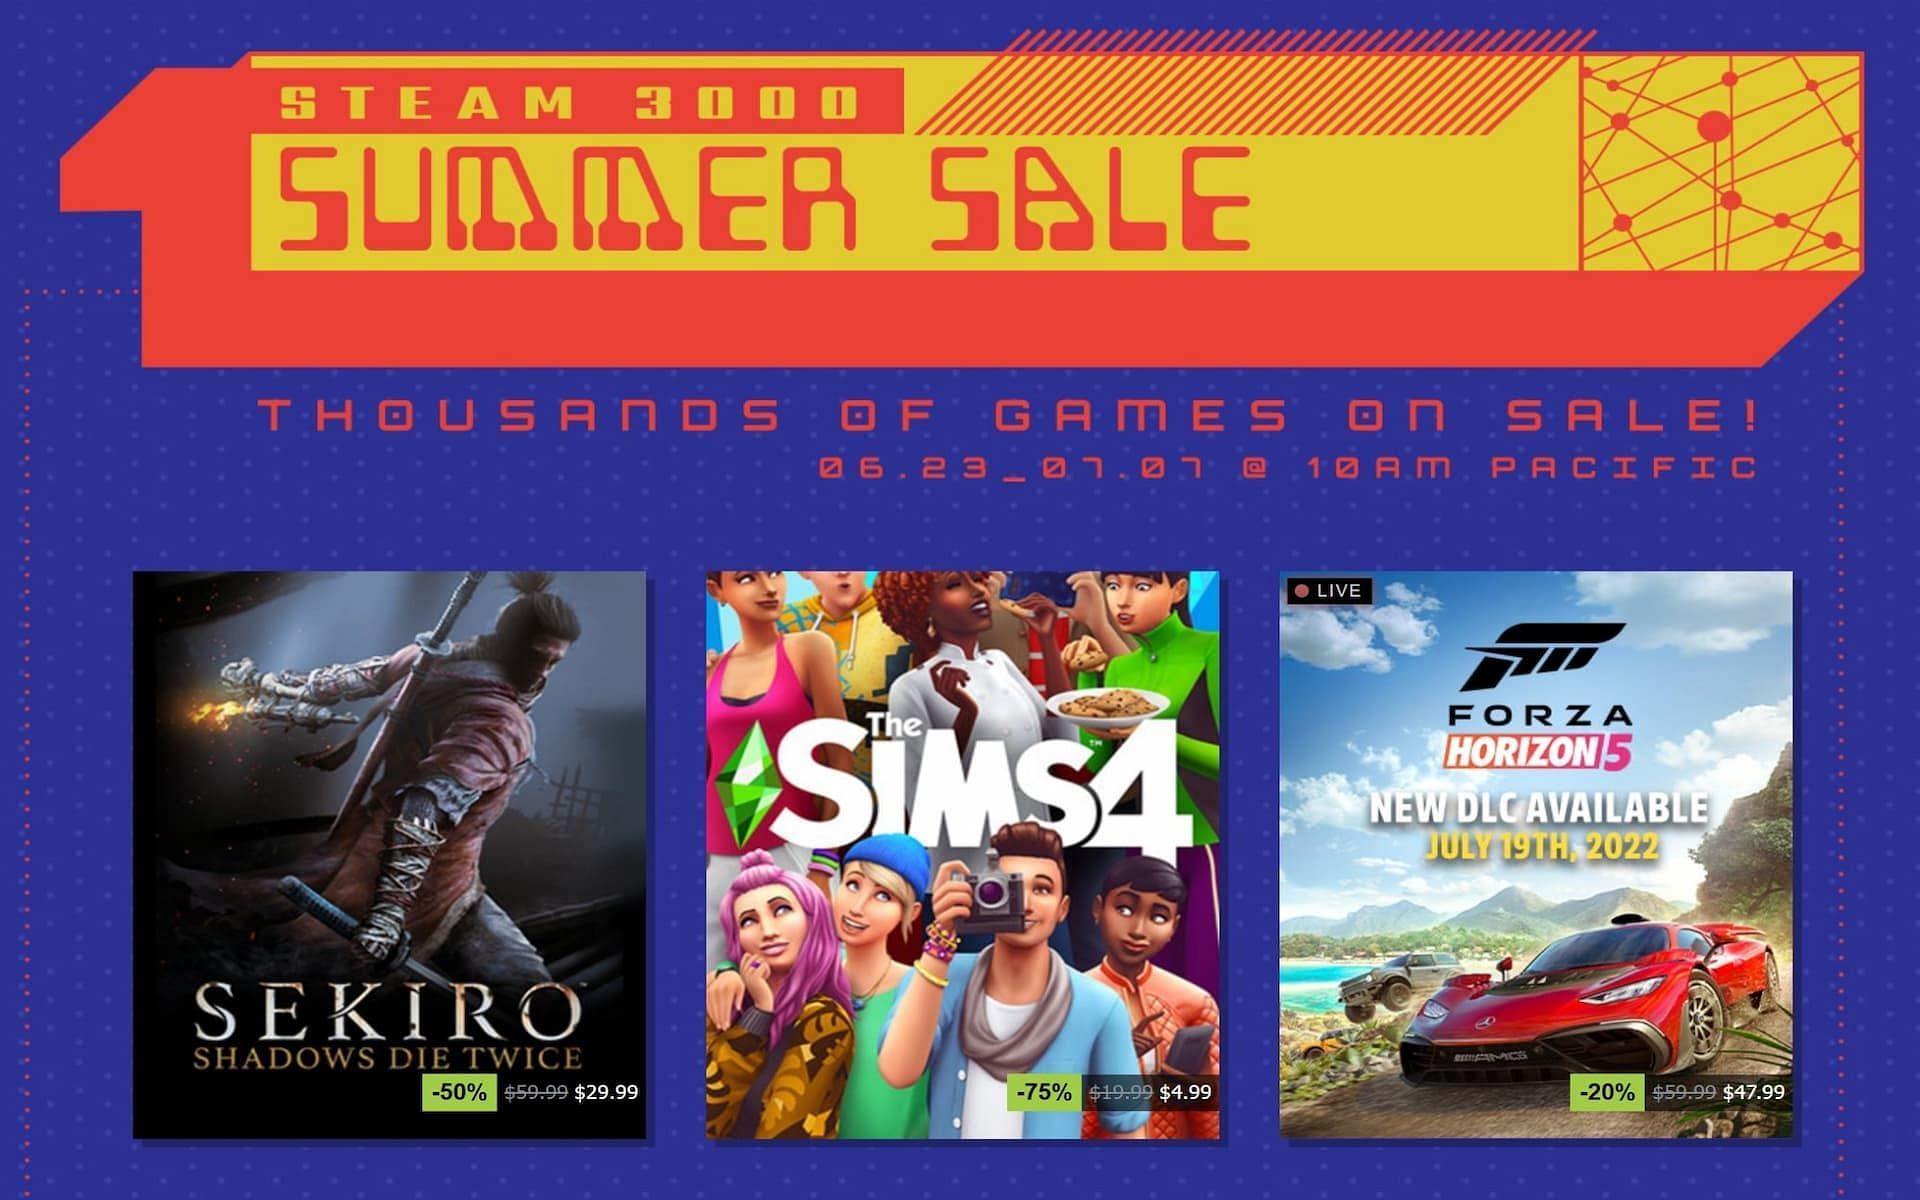 Top 5 deals from the Steam Summer Sale